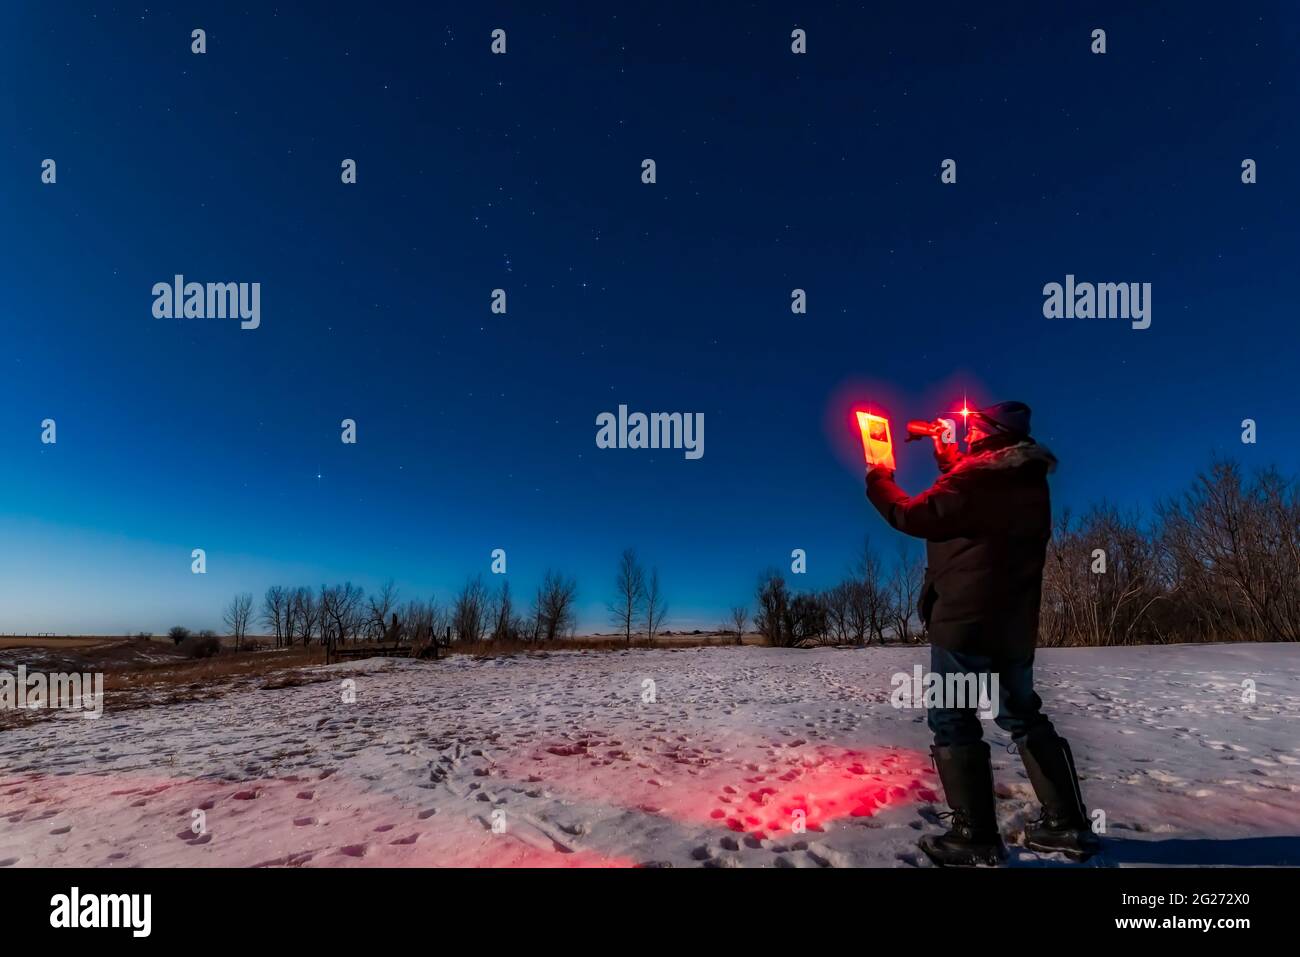 Astronomer using binoculars and guidebook to find targets in the night sky. Stock Photo